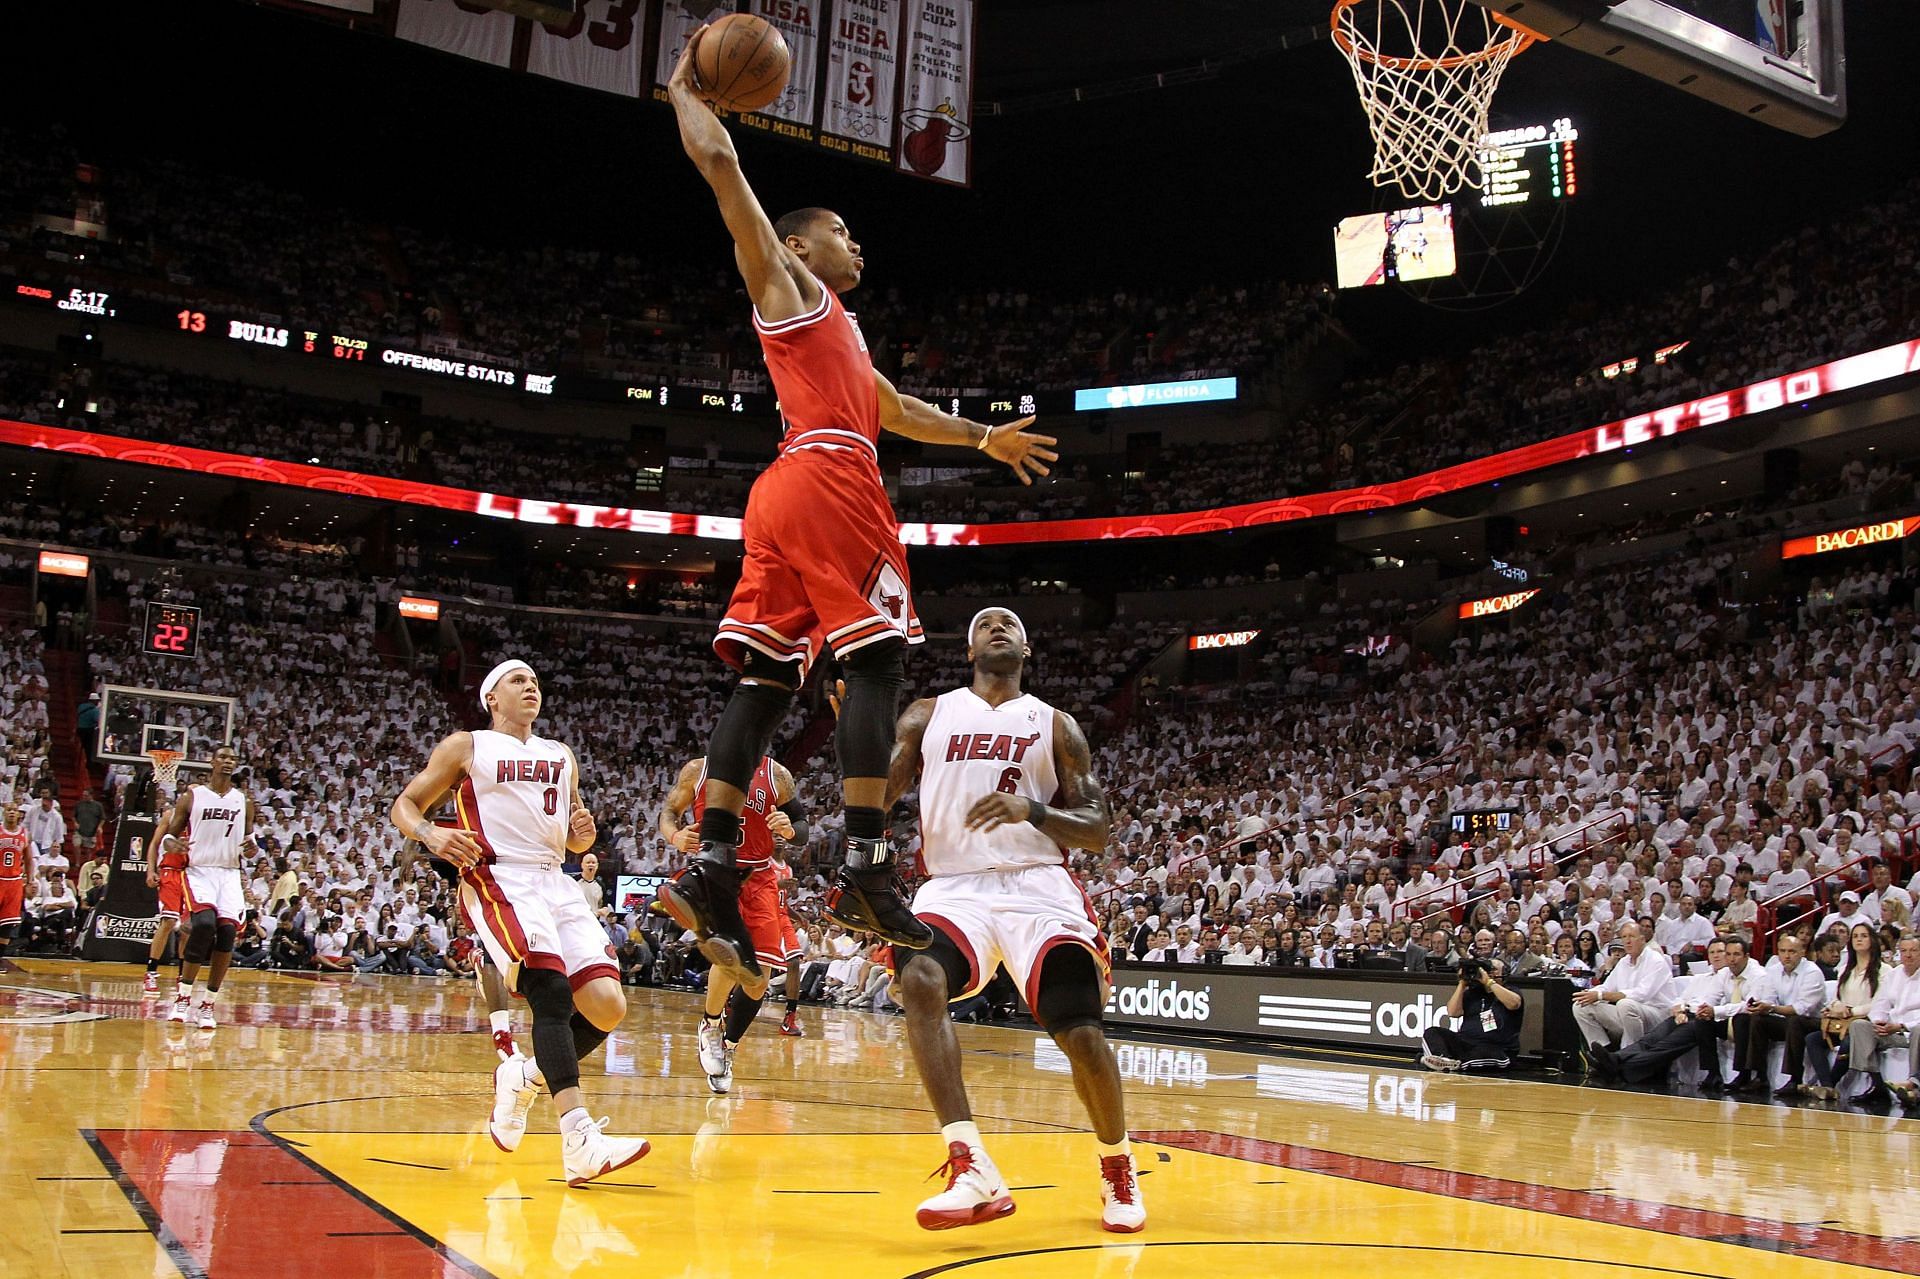  Derrick Rose #1 of the Chicago Bulls dunks against LeBron James #6 and Mike Bibby #0 of the Miami Heat 